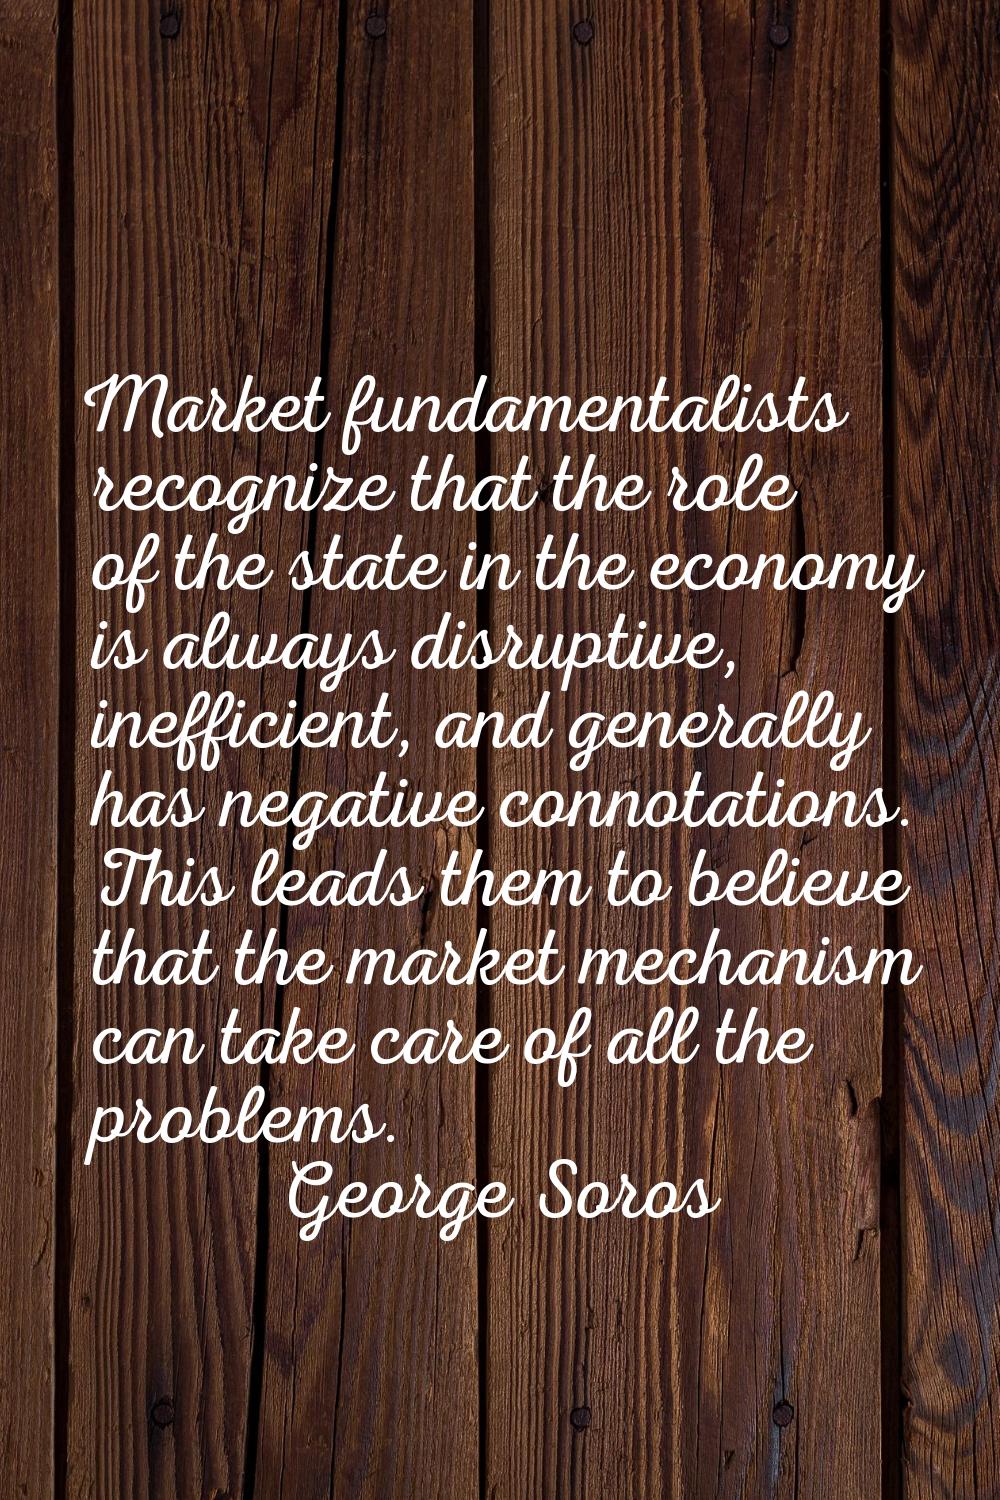 Market fundamentalists recognize that the role of the state in the economy is always disruptive, in